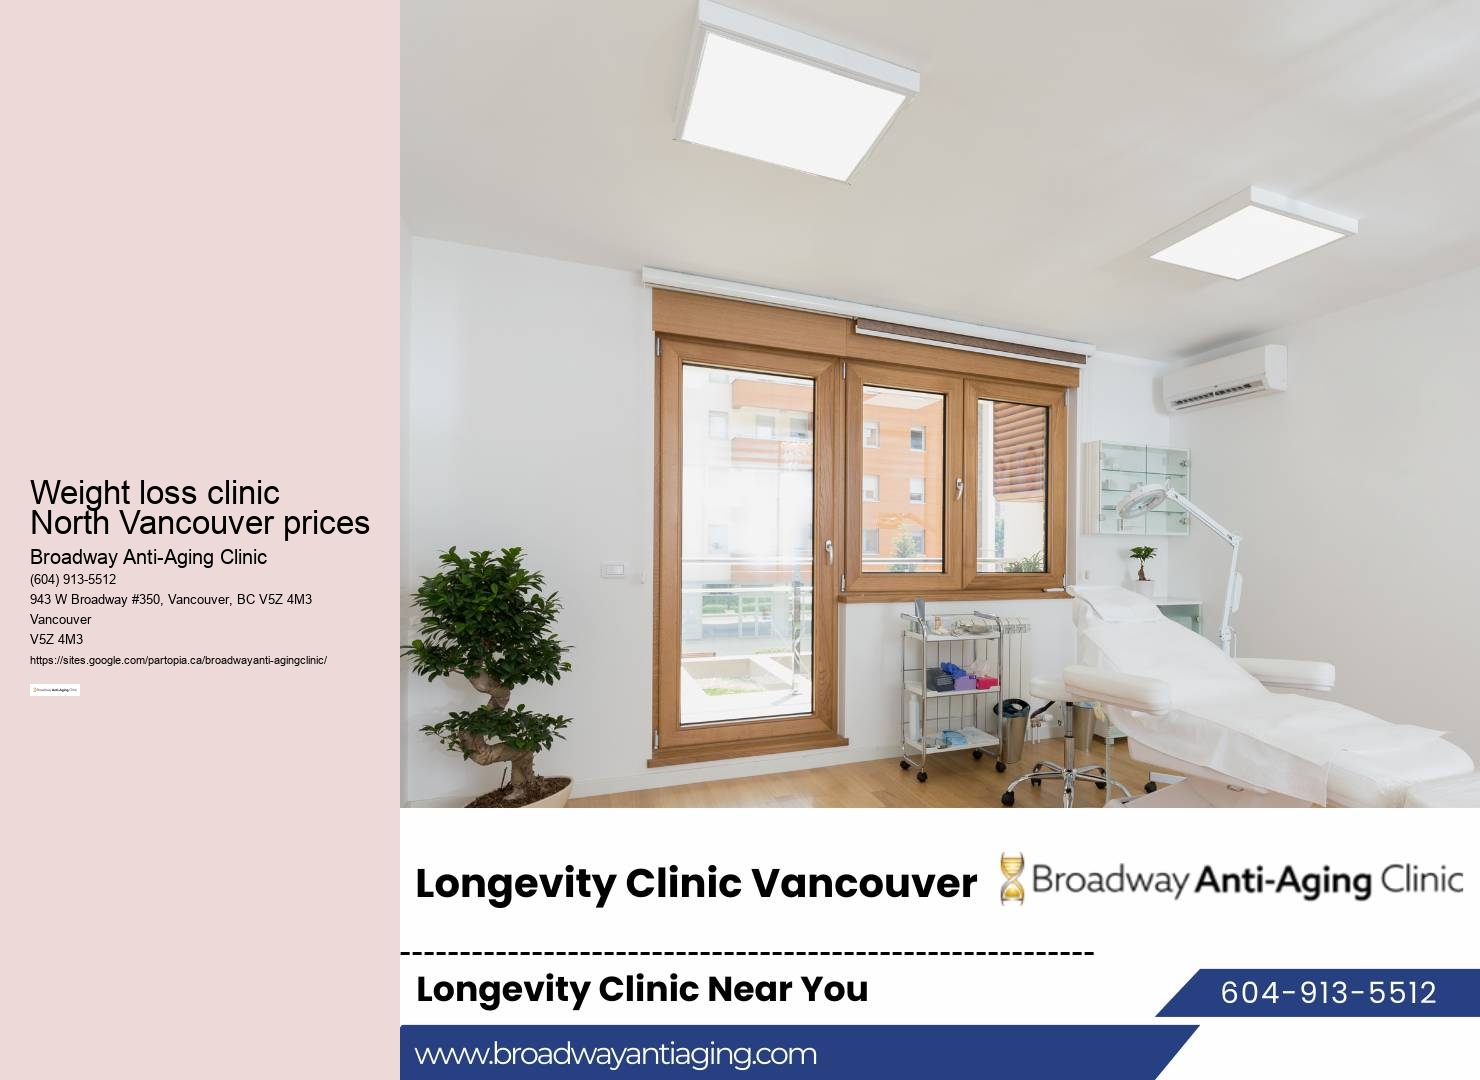 Weight loss clinic North Vancouver prices